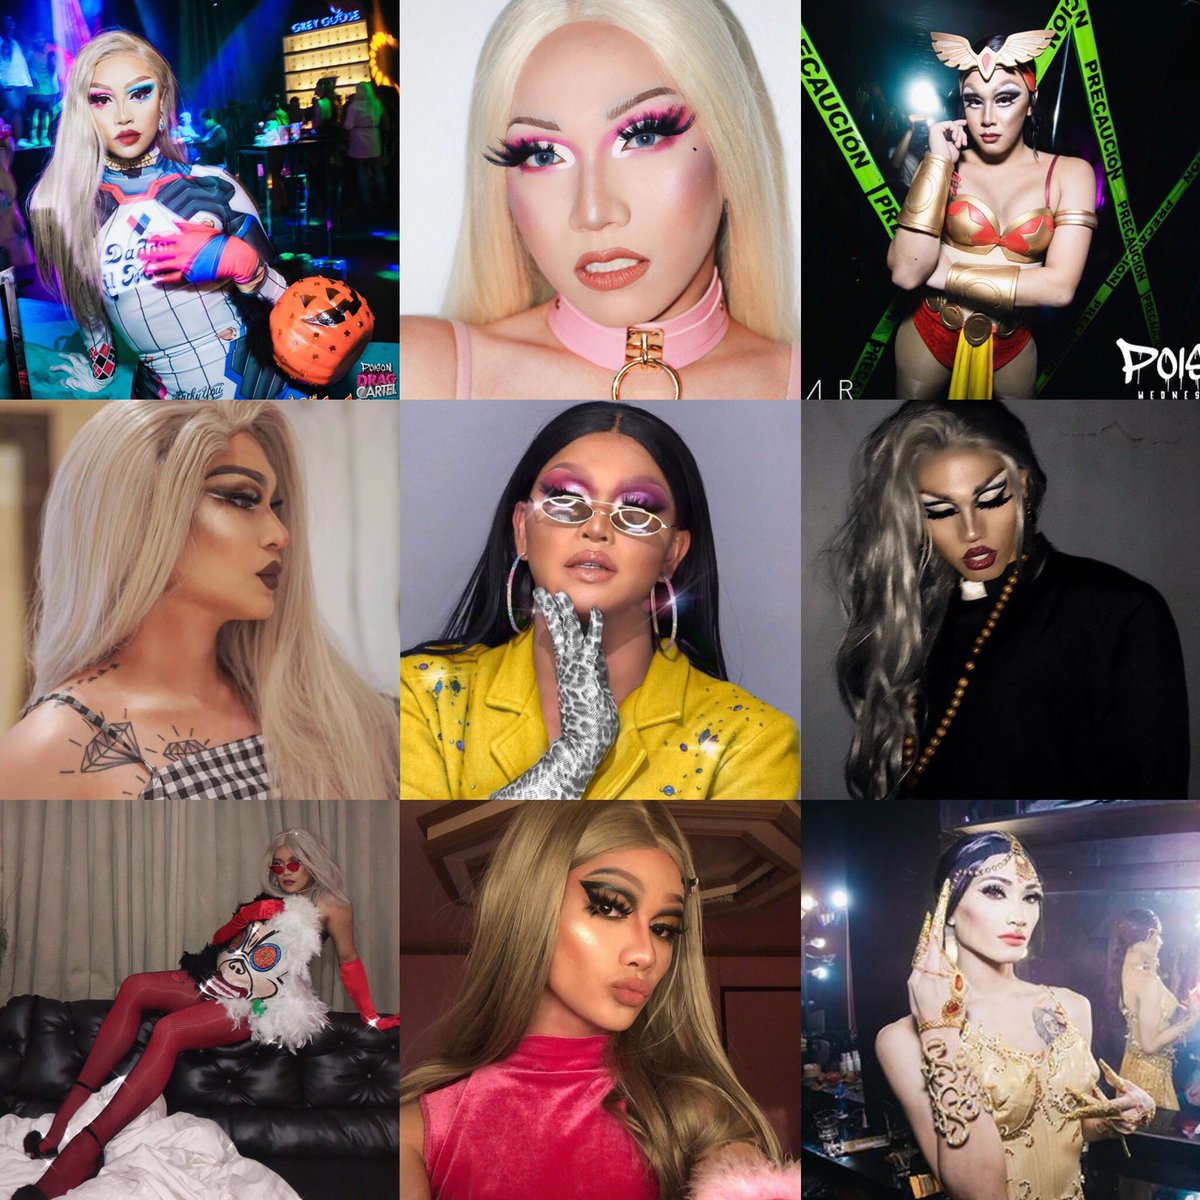 There’s lots of good drag in the Phillippines but not enough opportunities... (*cough, cough* @RuPaul)

Here’s some of my Poison sisters whom I admire and love... Come watch us at NECTAR every last Wednesday of the month for drag cartel... #SupportLocalDrag 

🇵🇭🌈🇵🇭🌈🇵🇭🌈🇵🇭